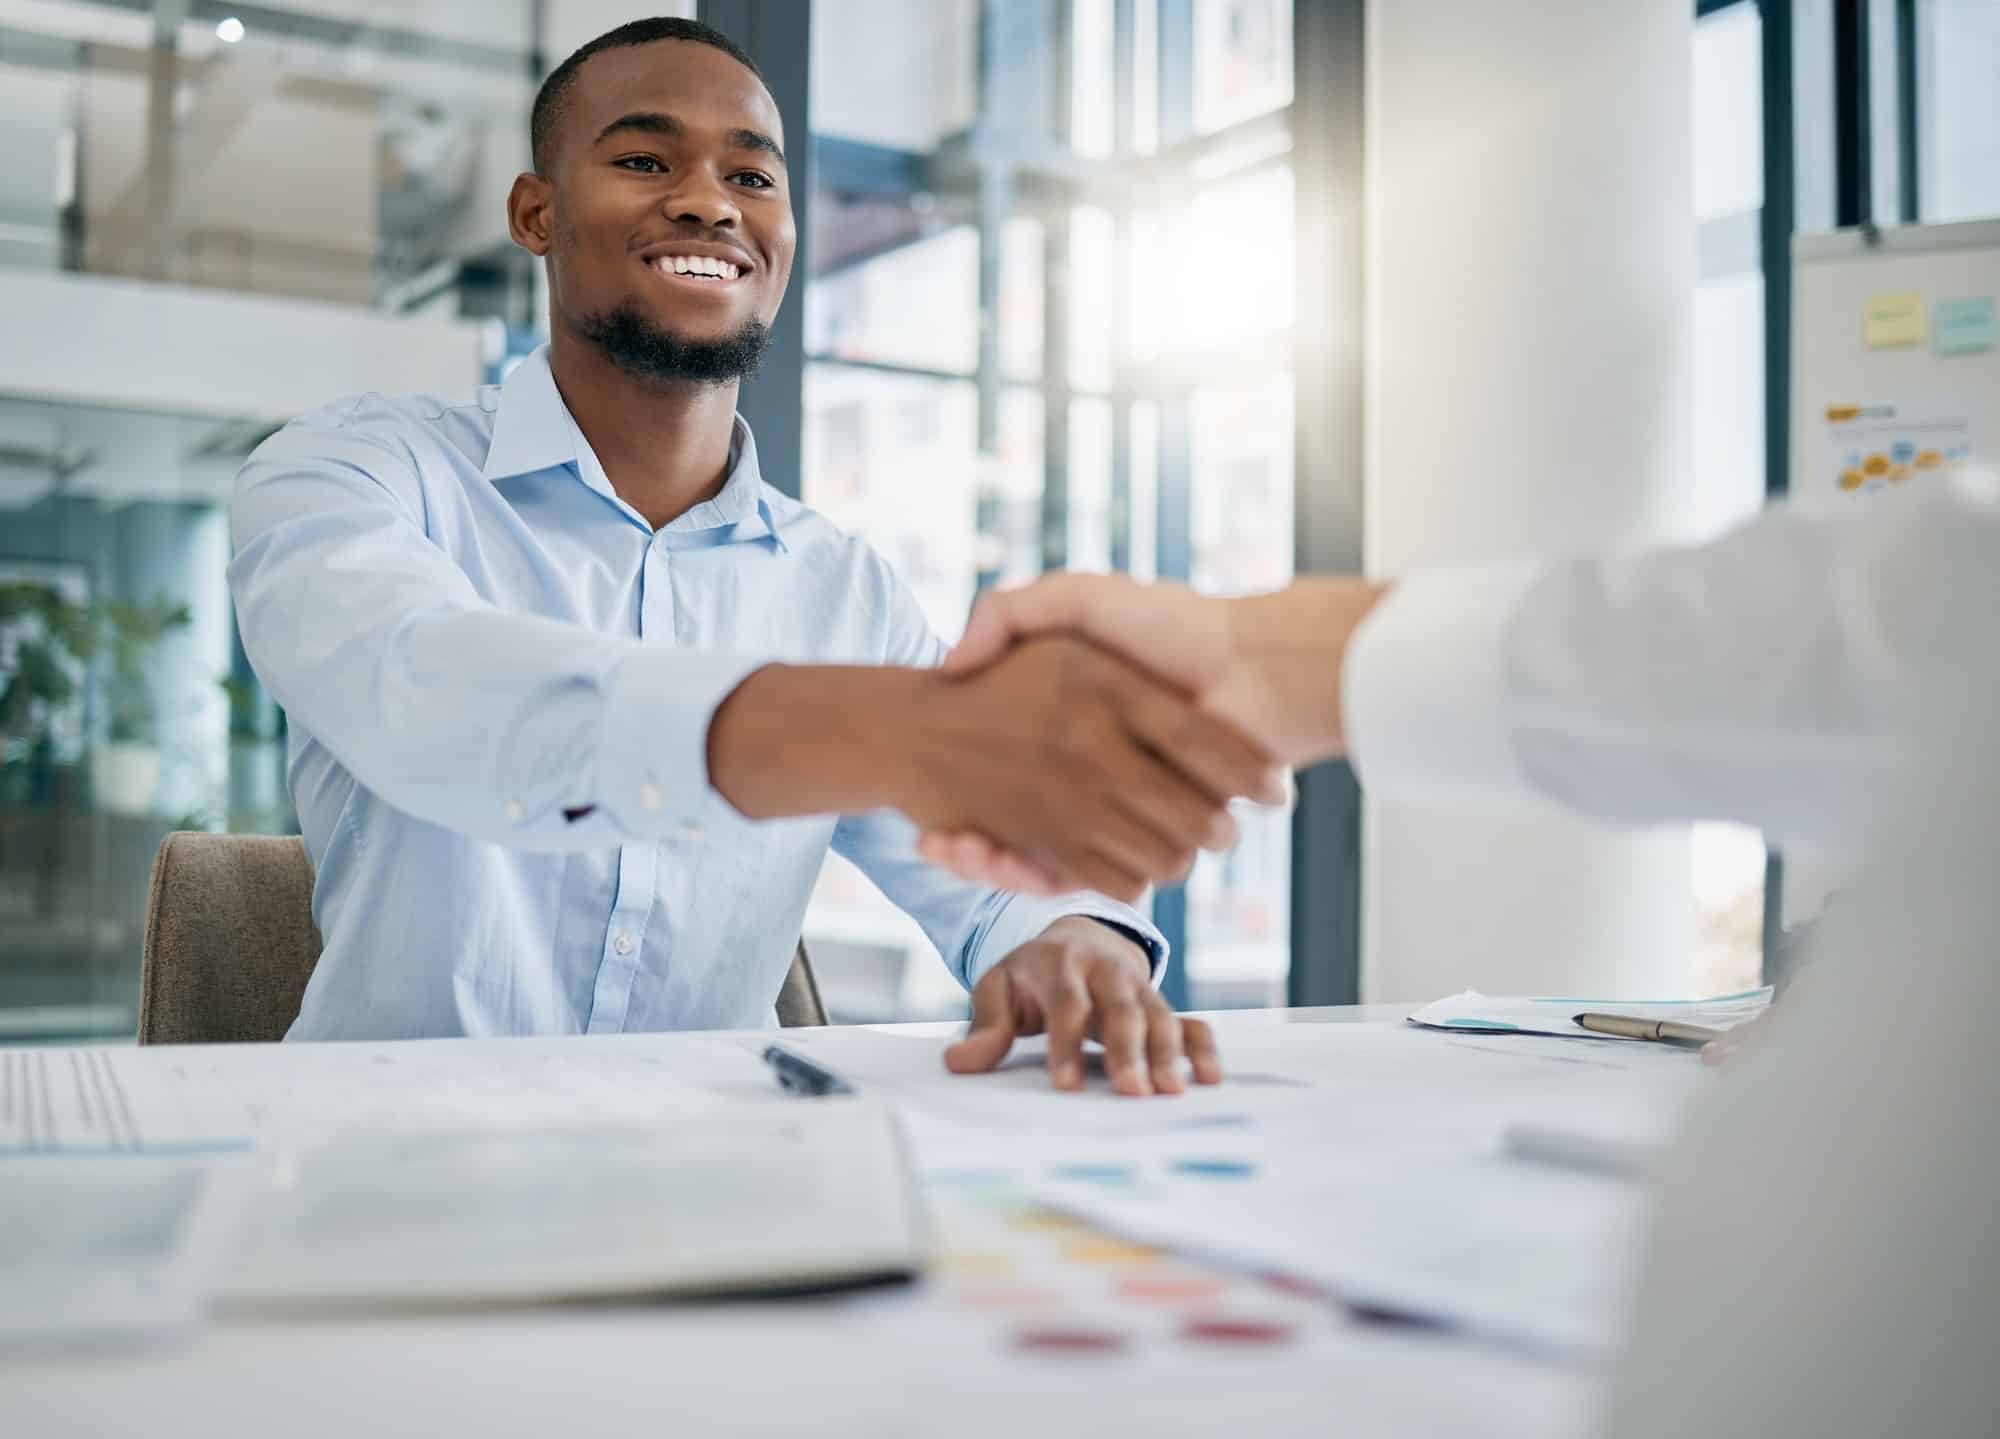 Hiring, designer or black man shaking hands with human resources manager for a successful job inter